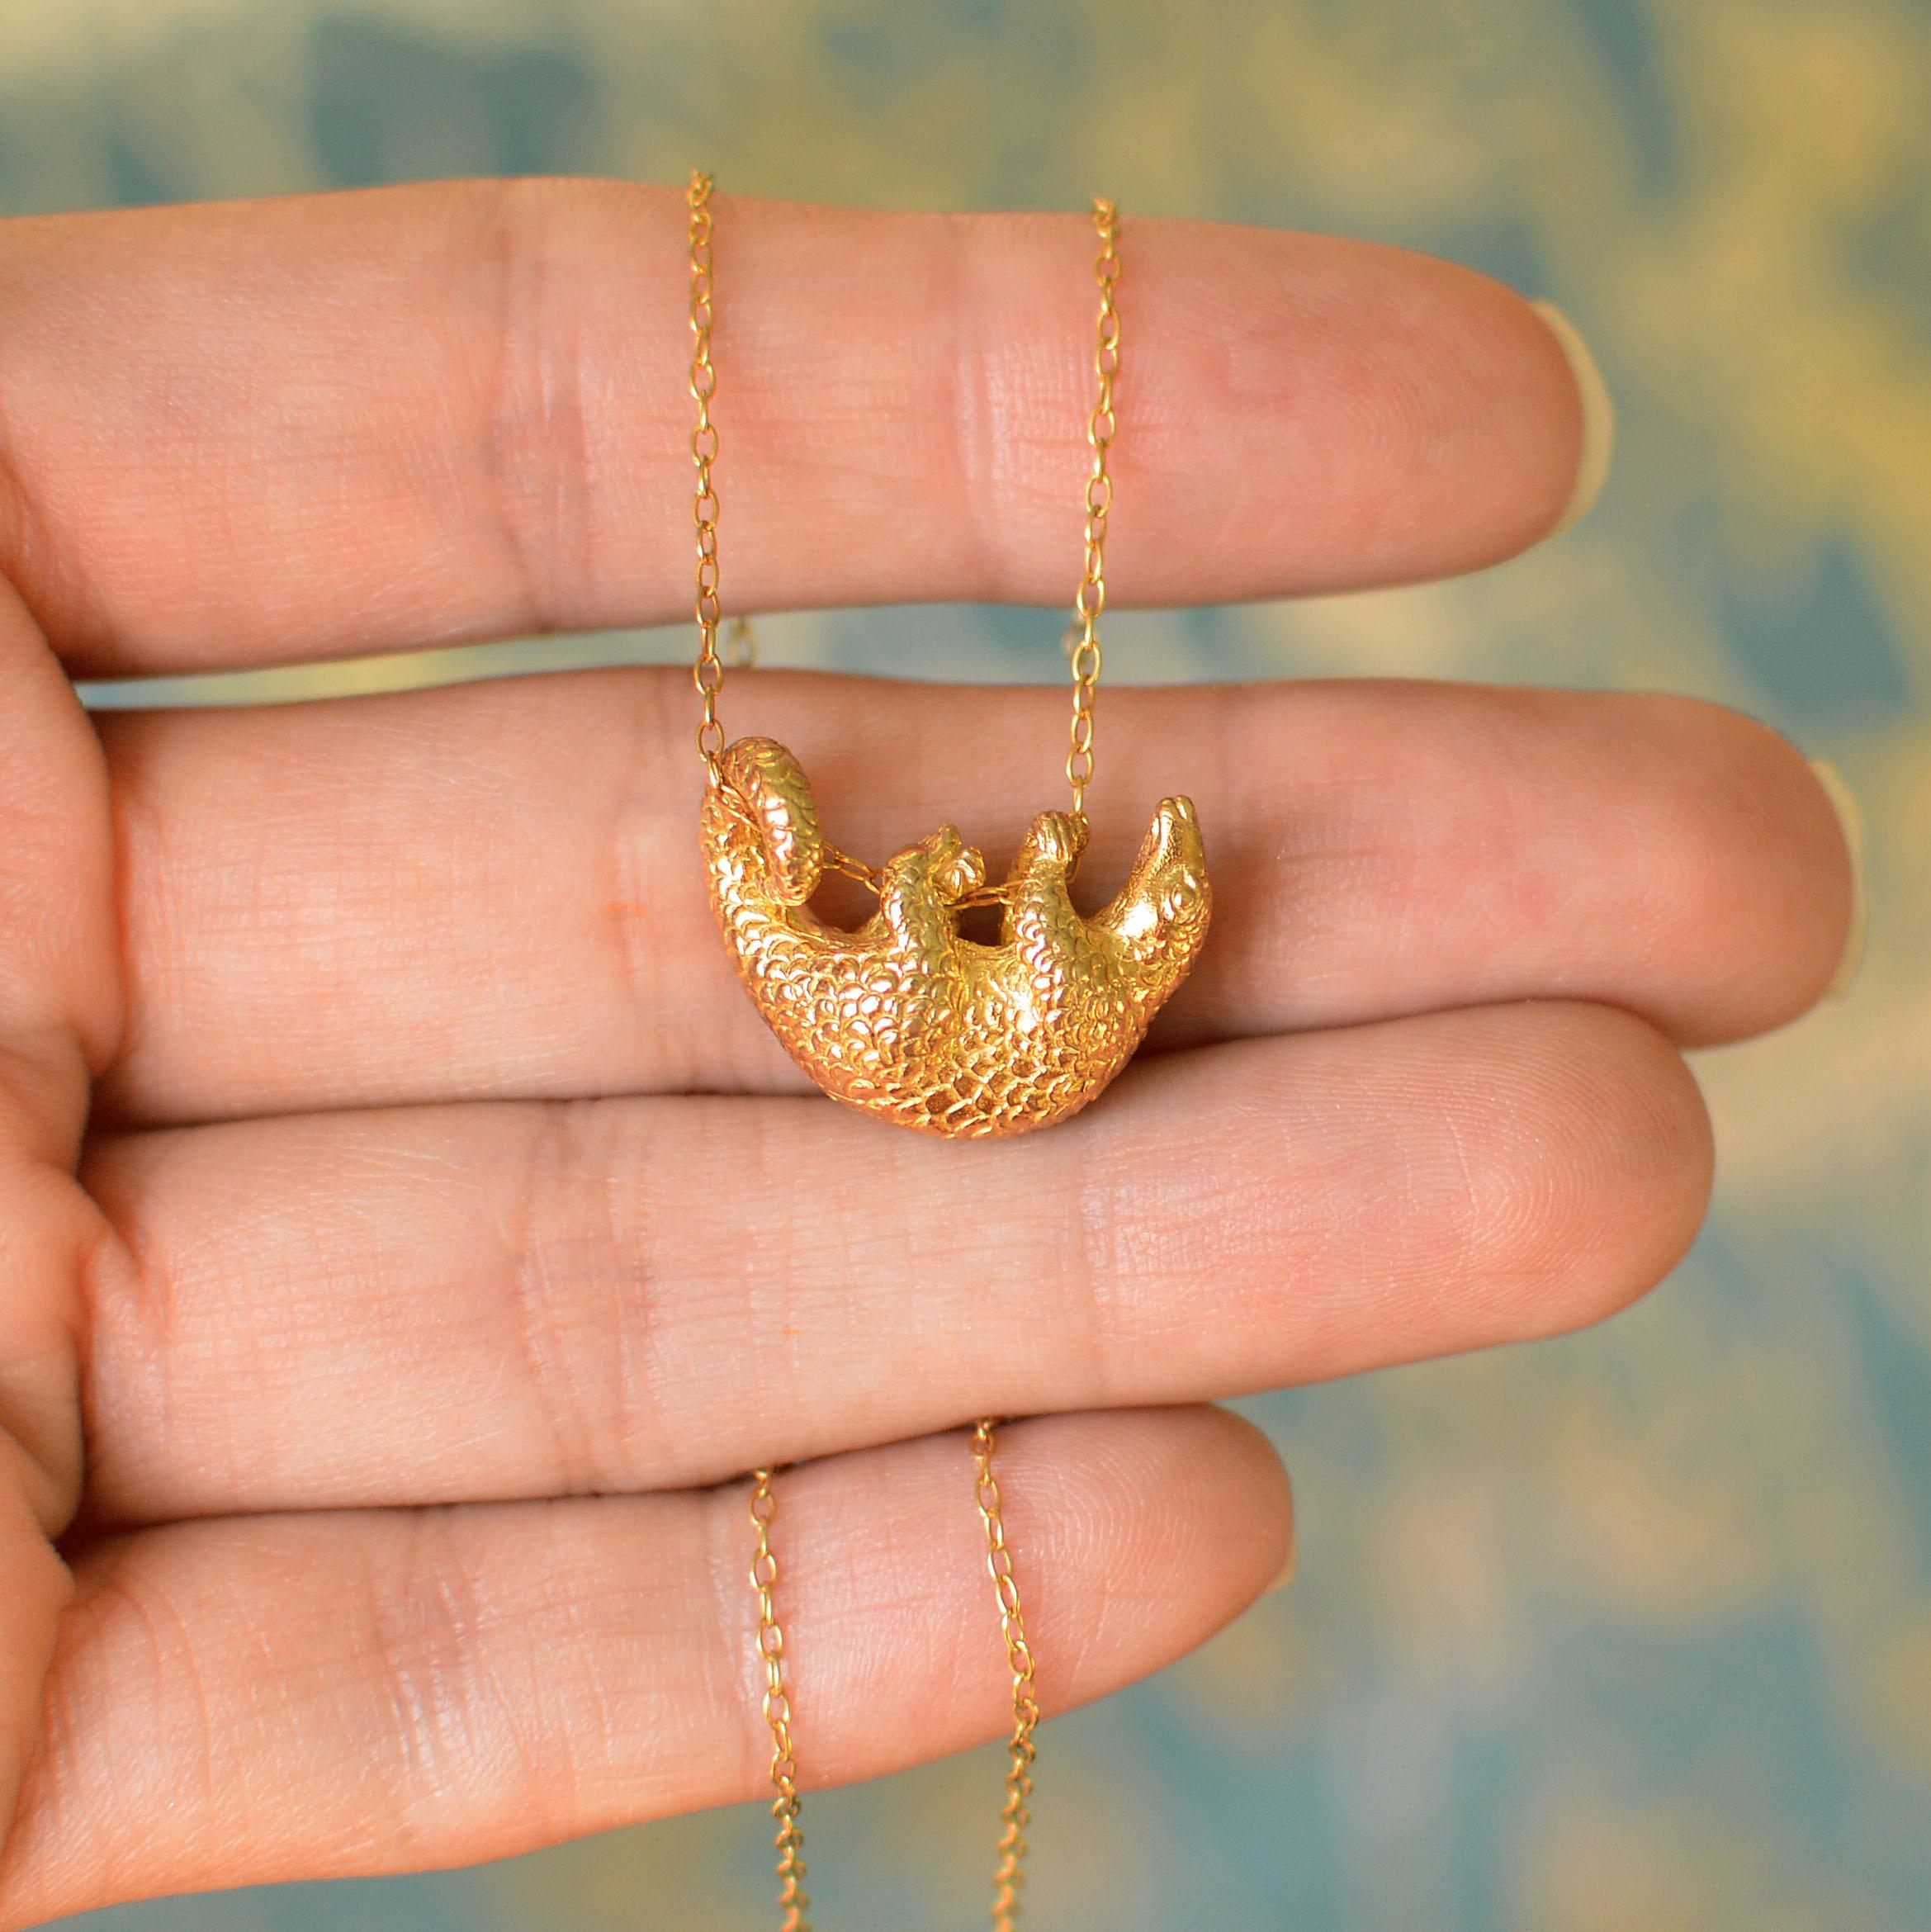 Solid 18 Carat Gold Pangolin Pendant By Lucy Stopes-Roe In New Condition For Sale In London, GB